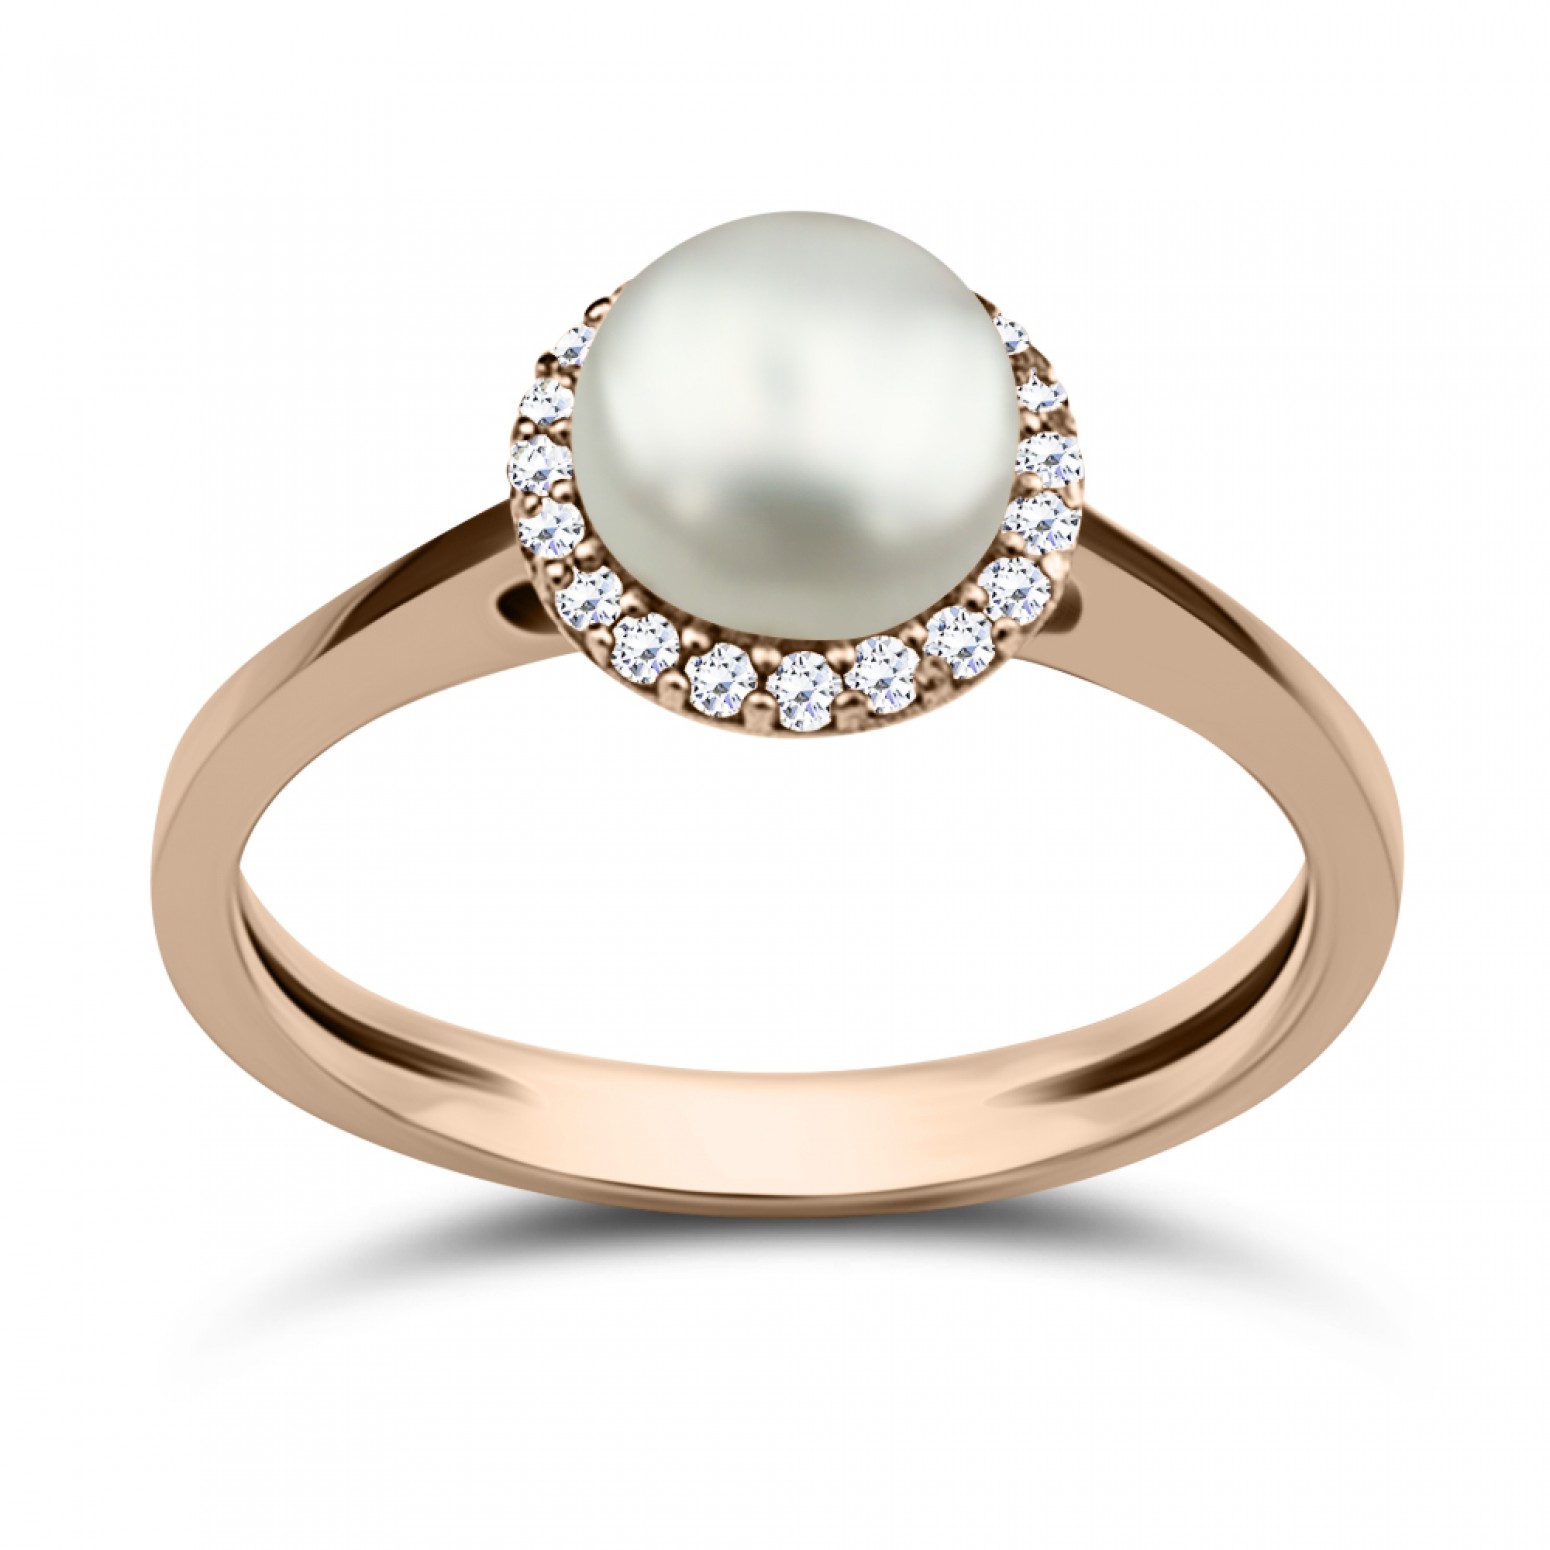 Multistone ring 14K pink gold with pearl and zircon, da3675 ENGAGEMENT RINGS Κοσμηματα - chrilia.gr